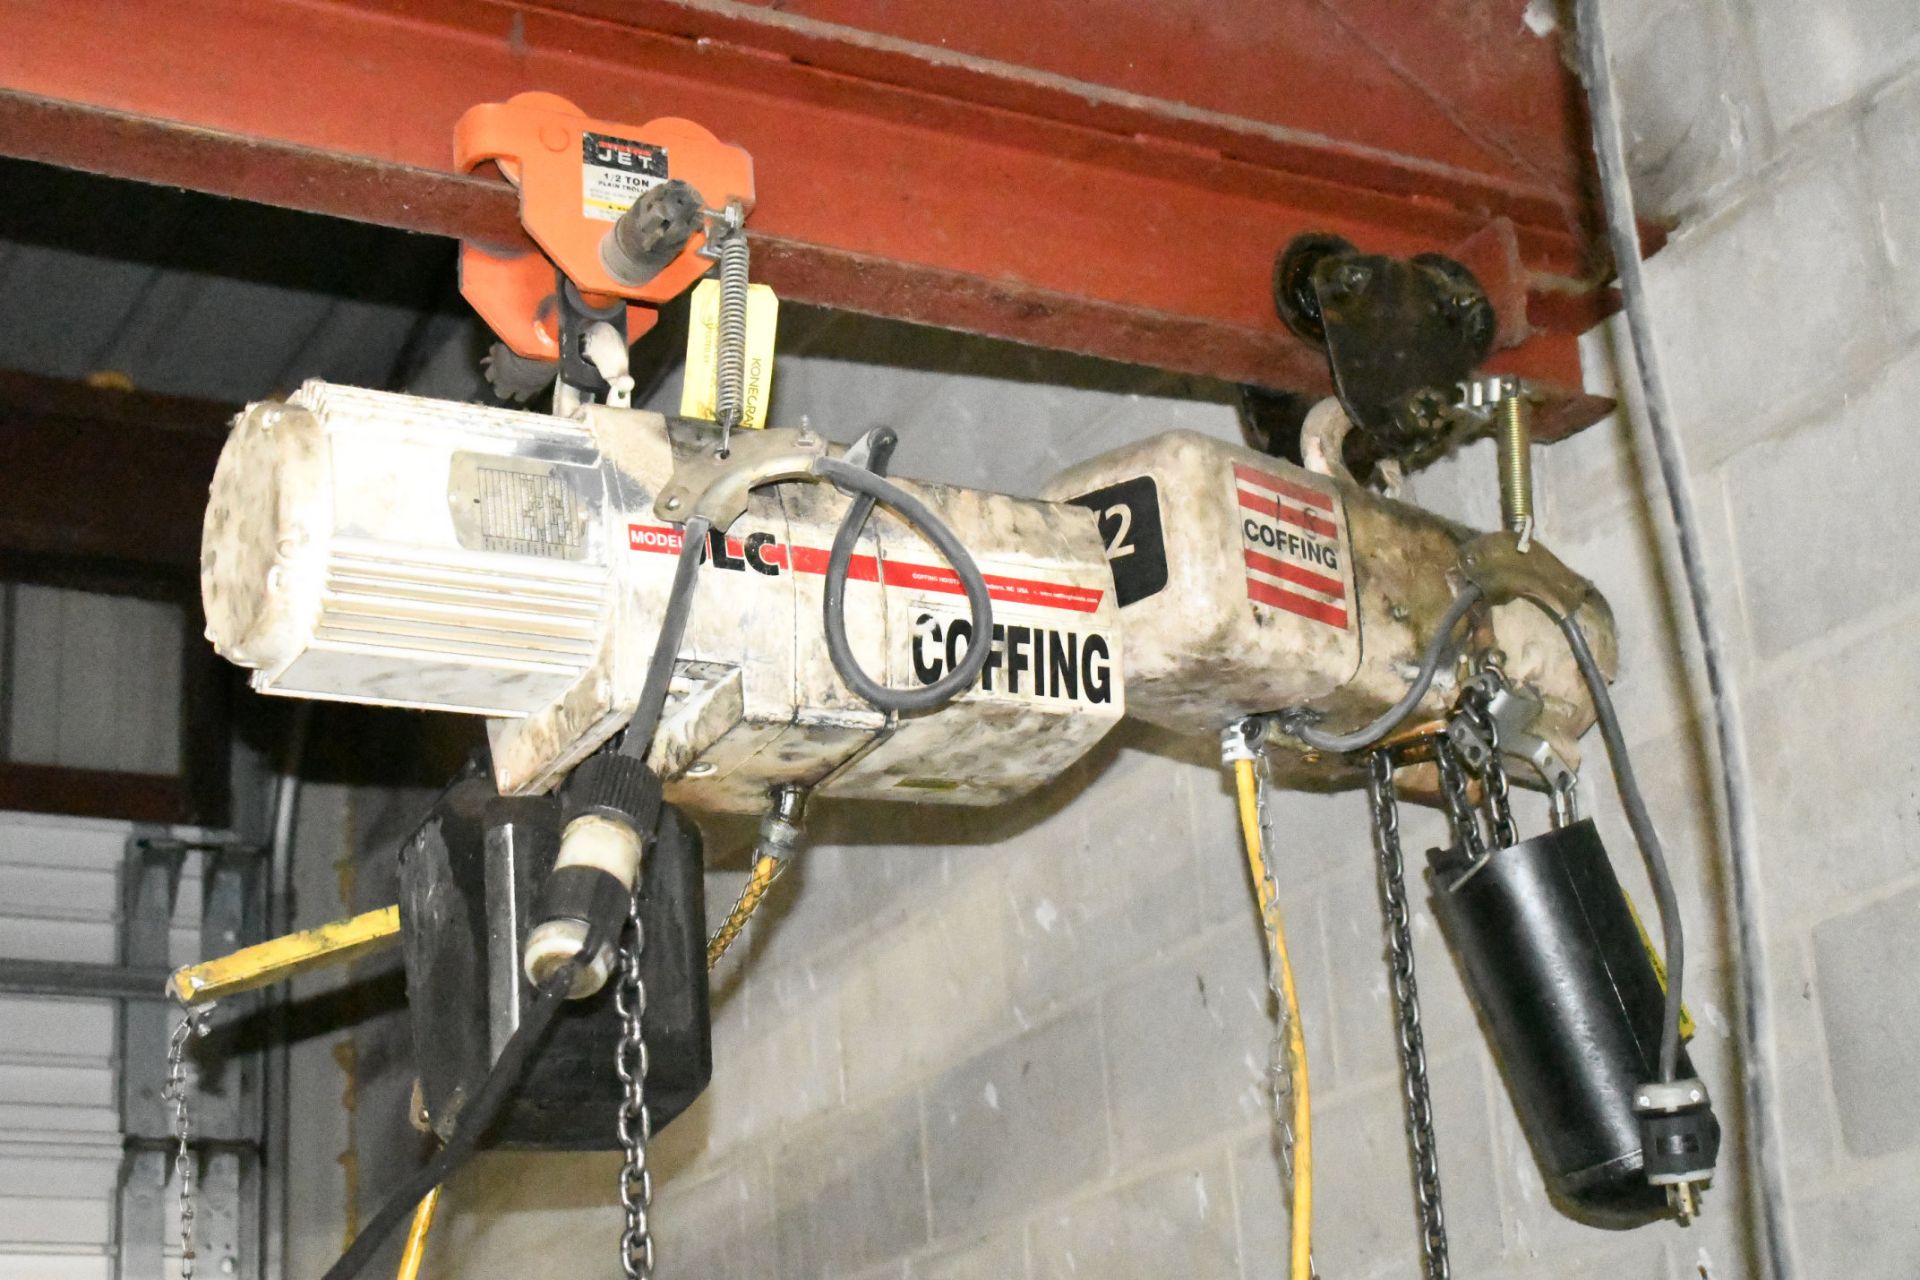 Lot-(2) Coffing 1/2-Ton Electric Hoists with Trollies, (Rail Not Included), (West Dock Area) - Image 2 of 2